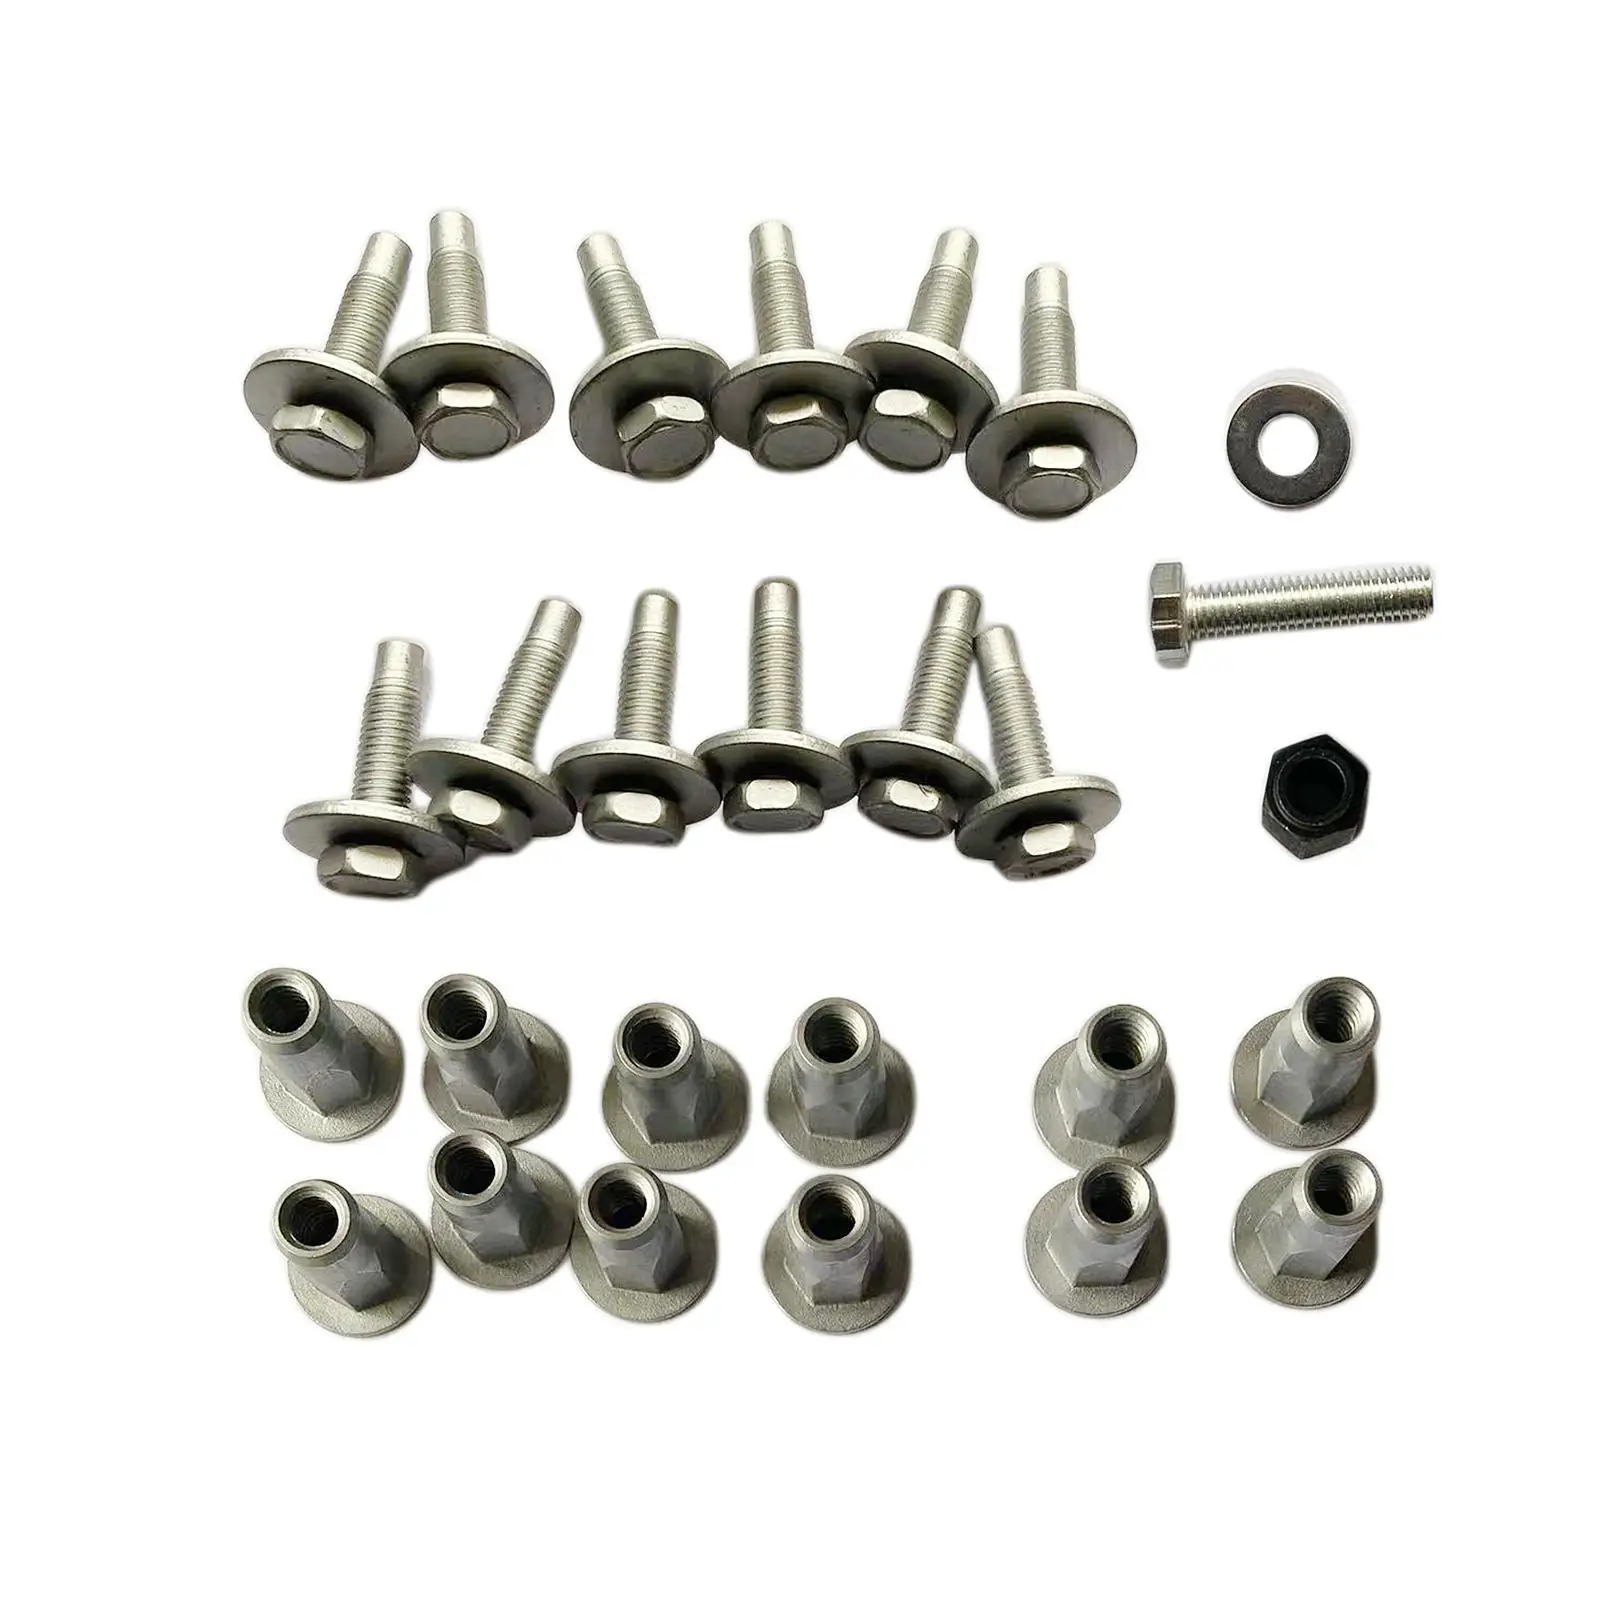 27Pcs Car Sidestep Mounting Kit Auto Durable Metal for Dodge RAM 1500 2500 3500 Spare Parts Assembly Replaces Repair